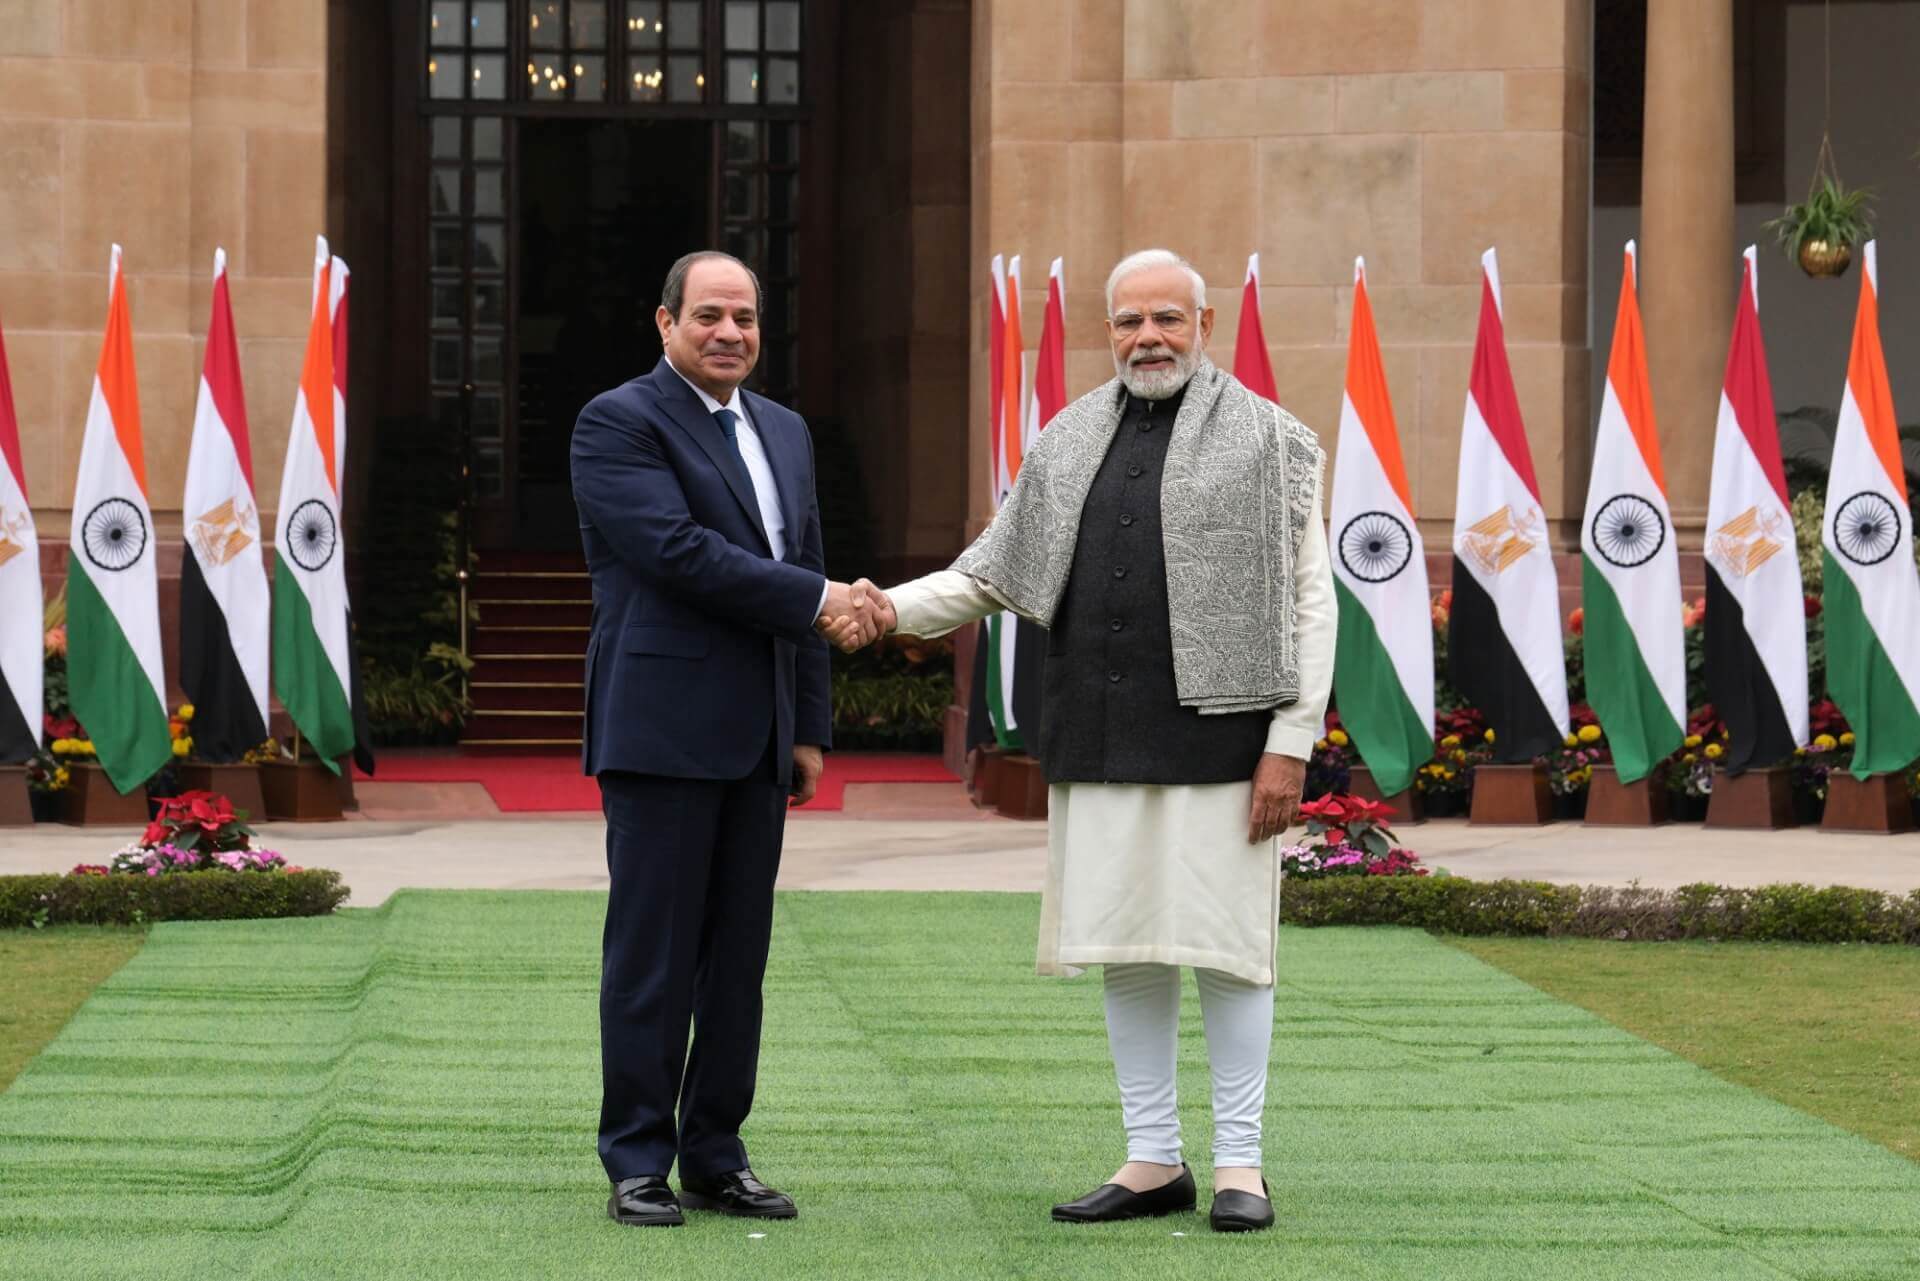 Statecraft Explains | Why India and Egypt Elevated Ties to a “Strategic Partnership”